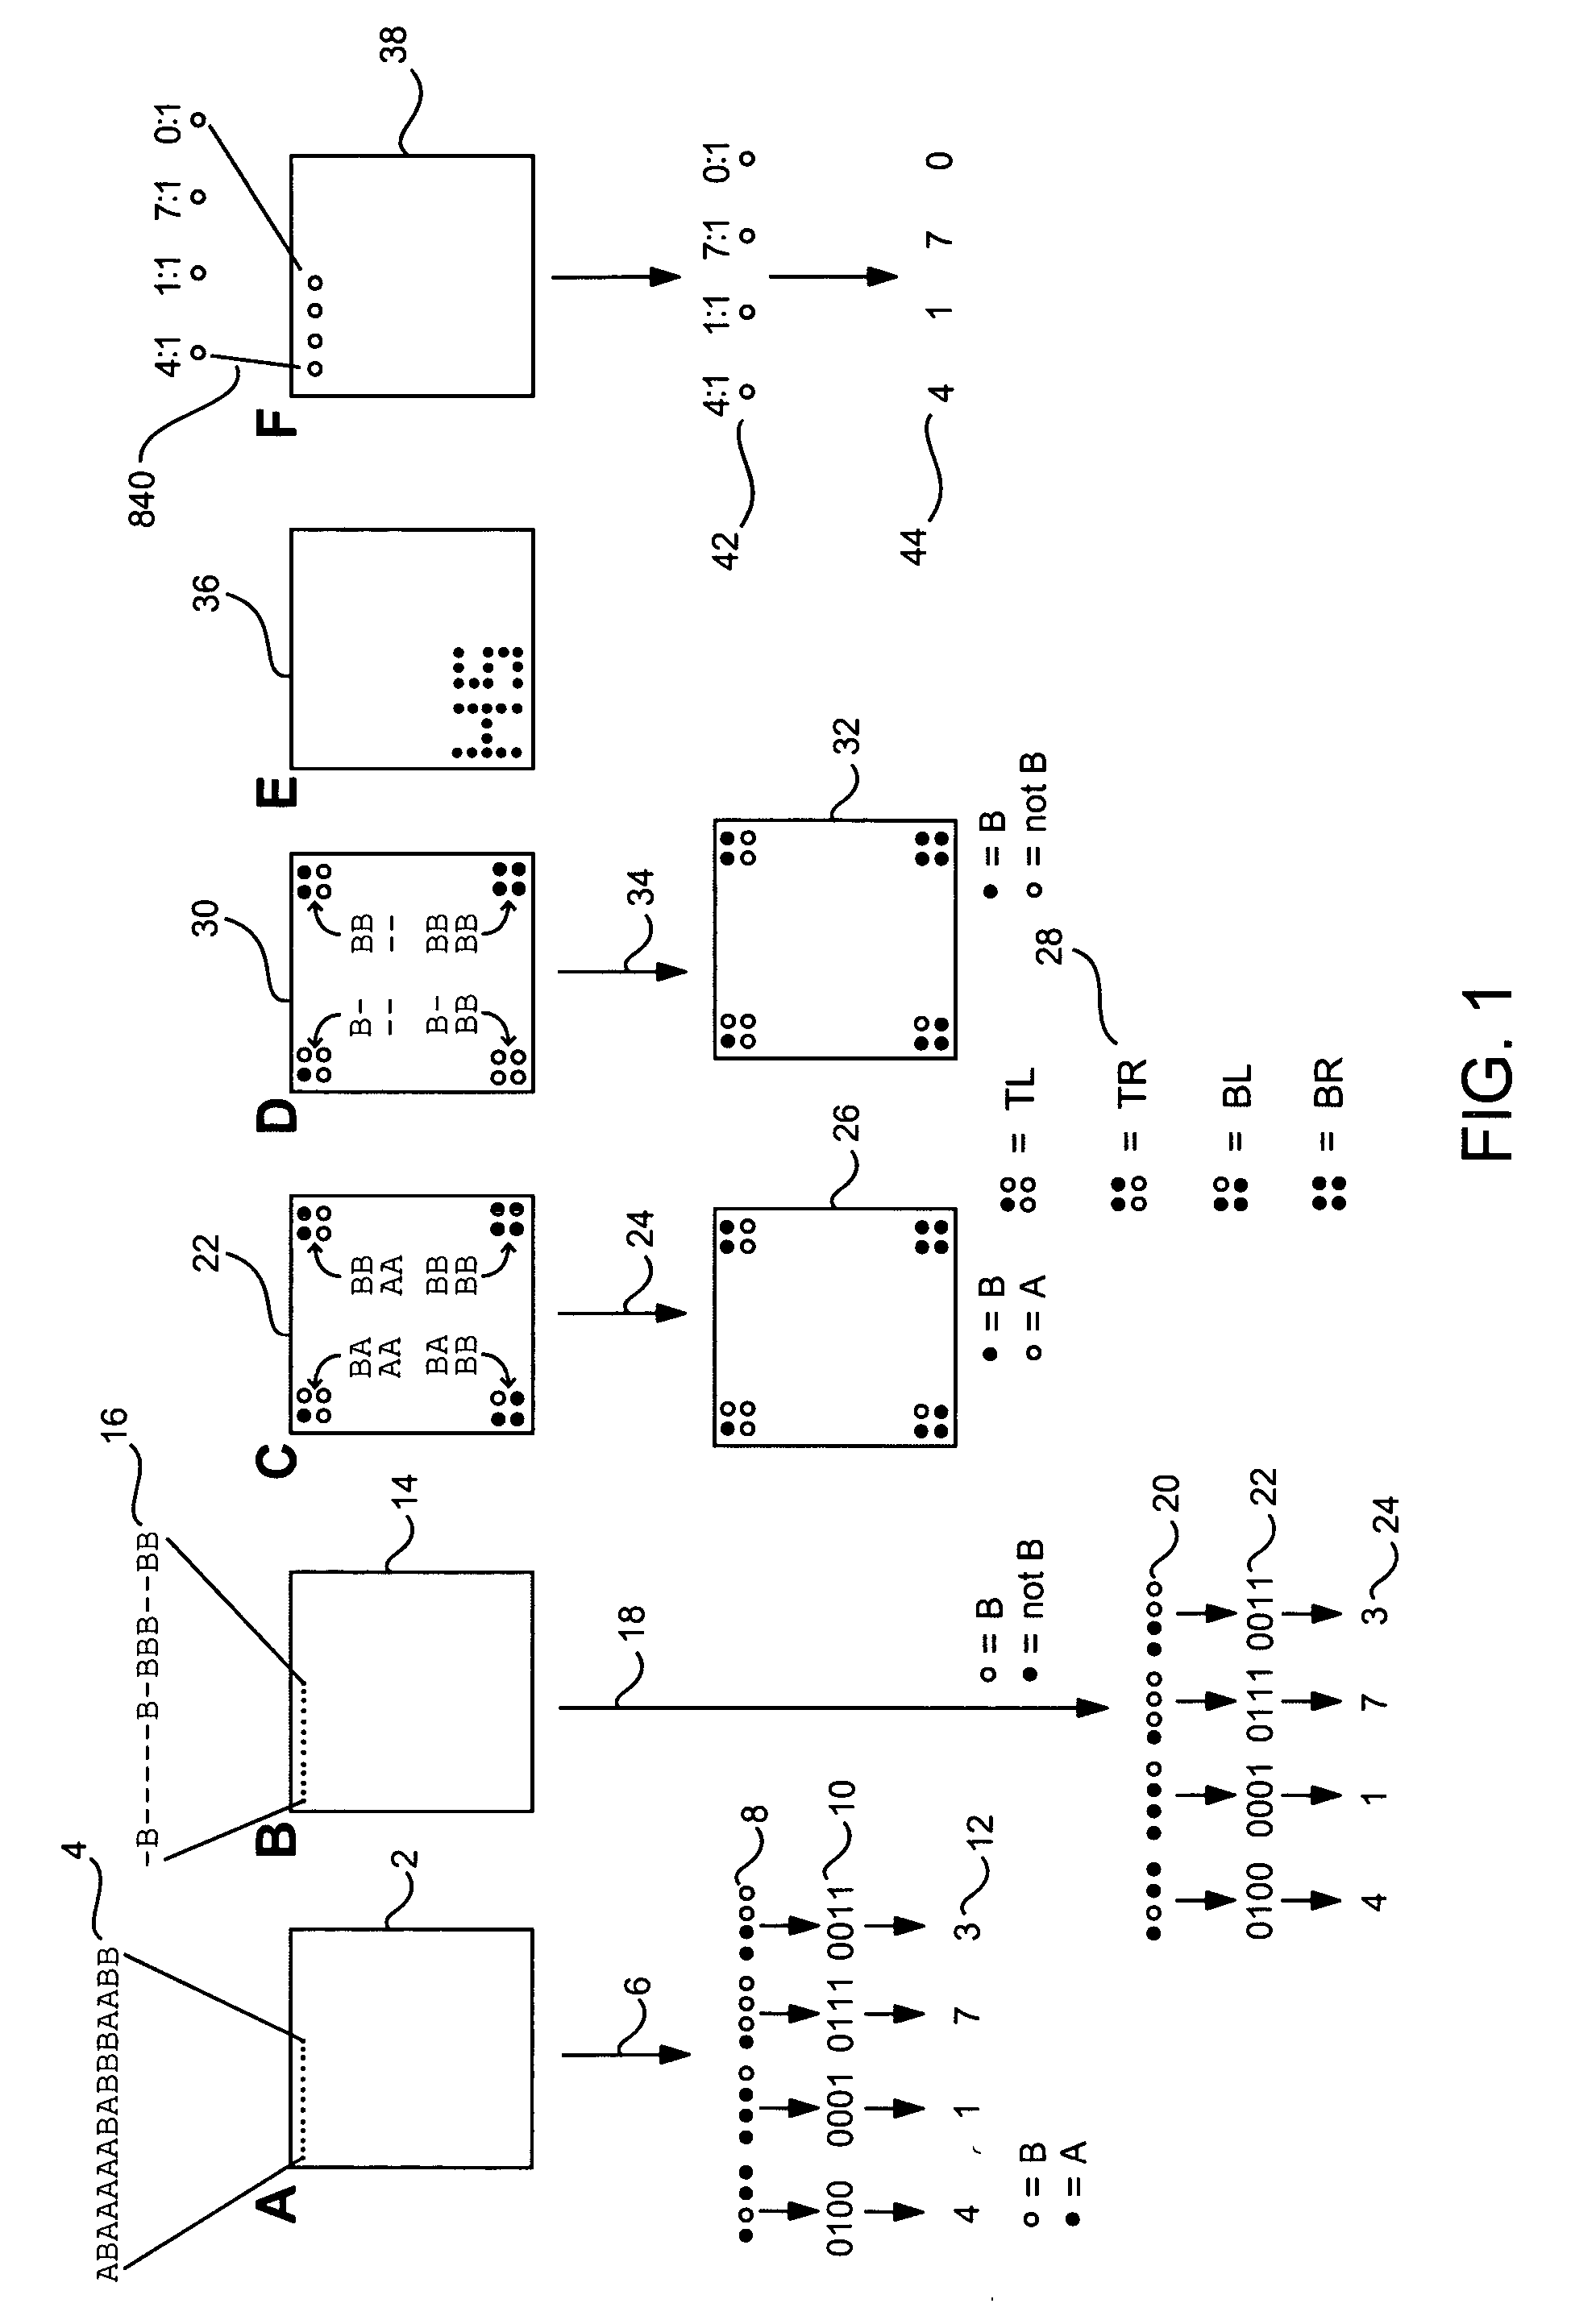 Methods for encoding non-biological information on microarrays